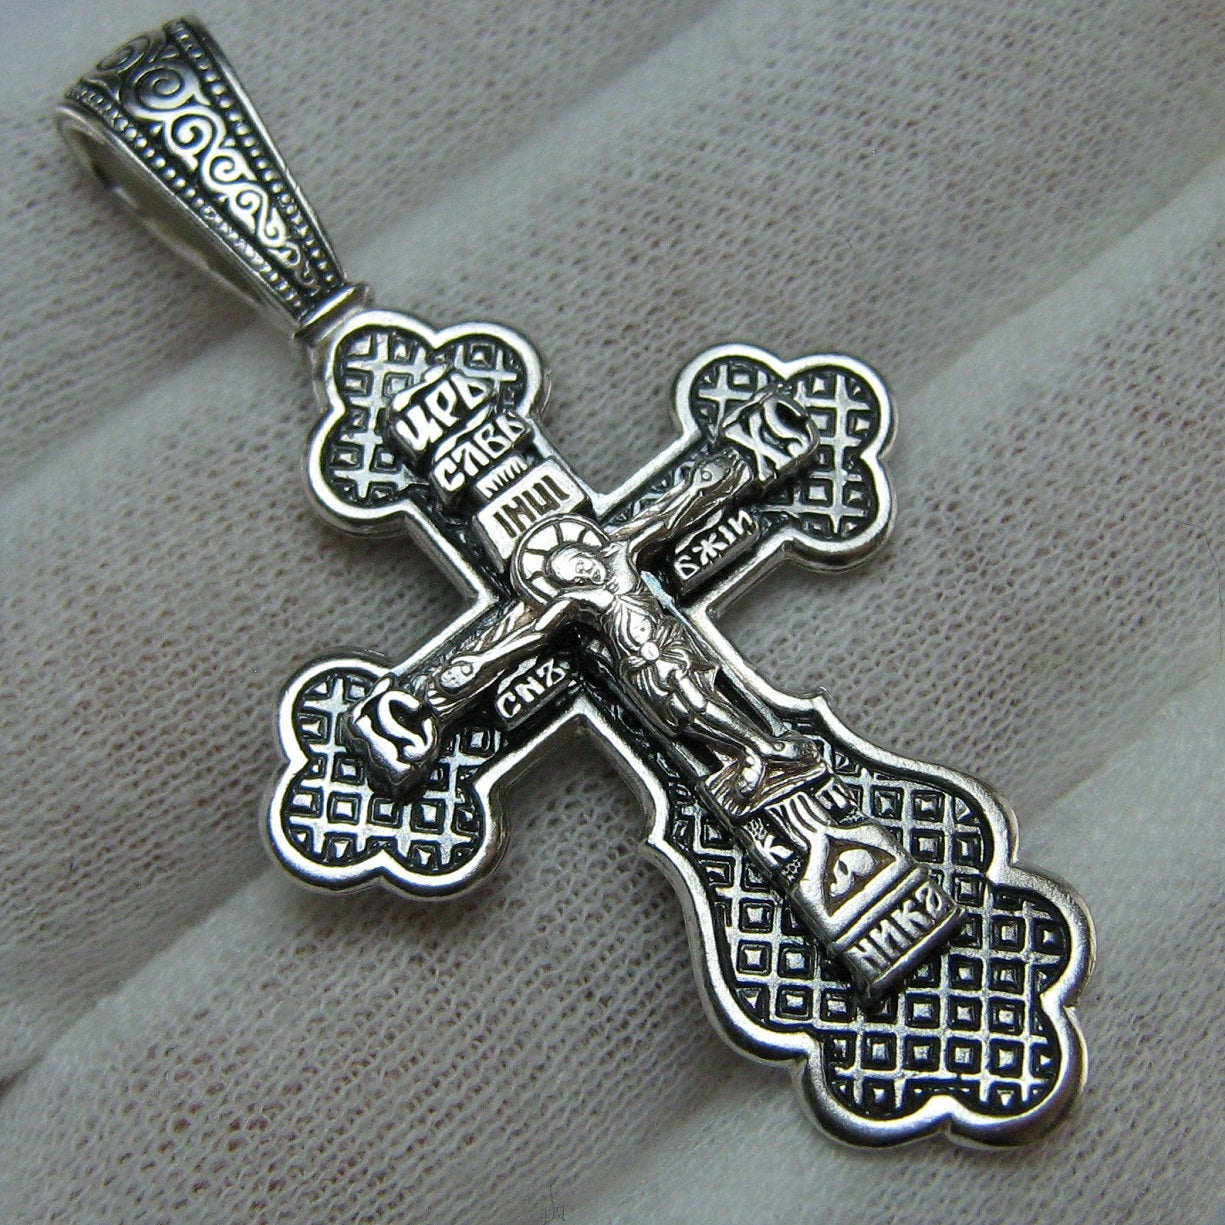 Vintage solid 925 Sterling Silver large and heavy oxidized cross pendant and detailed Jesus Christ crucifix with Christian prayer inscription to God decorated with geometrical, floral and filigree pattern